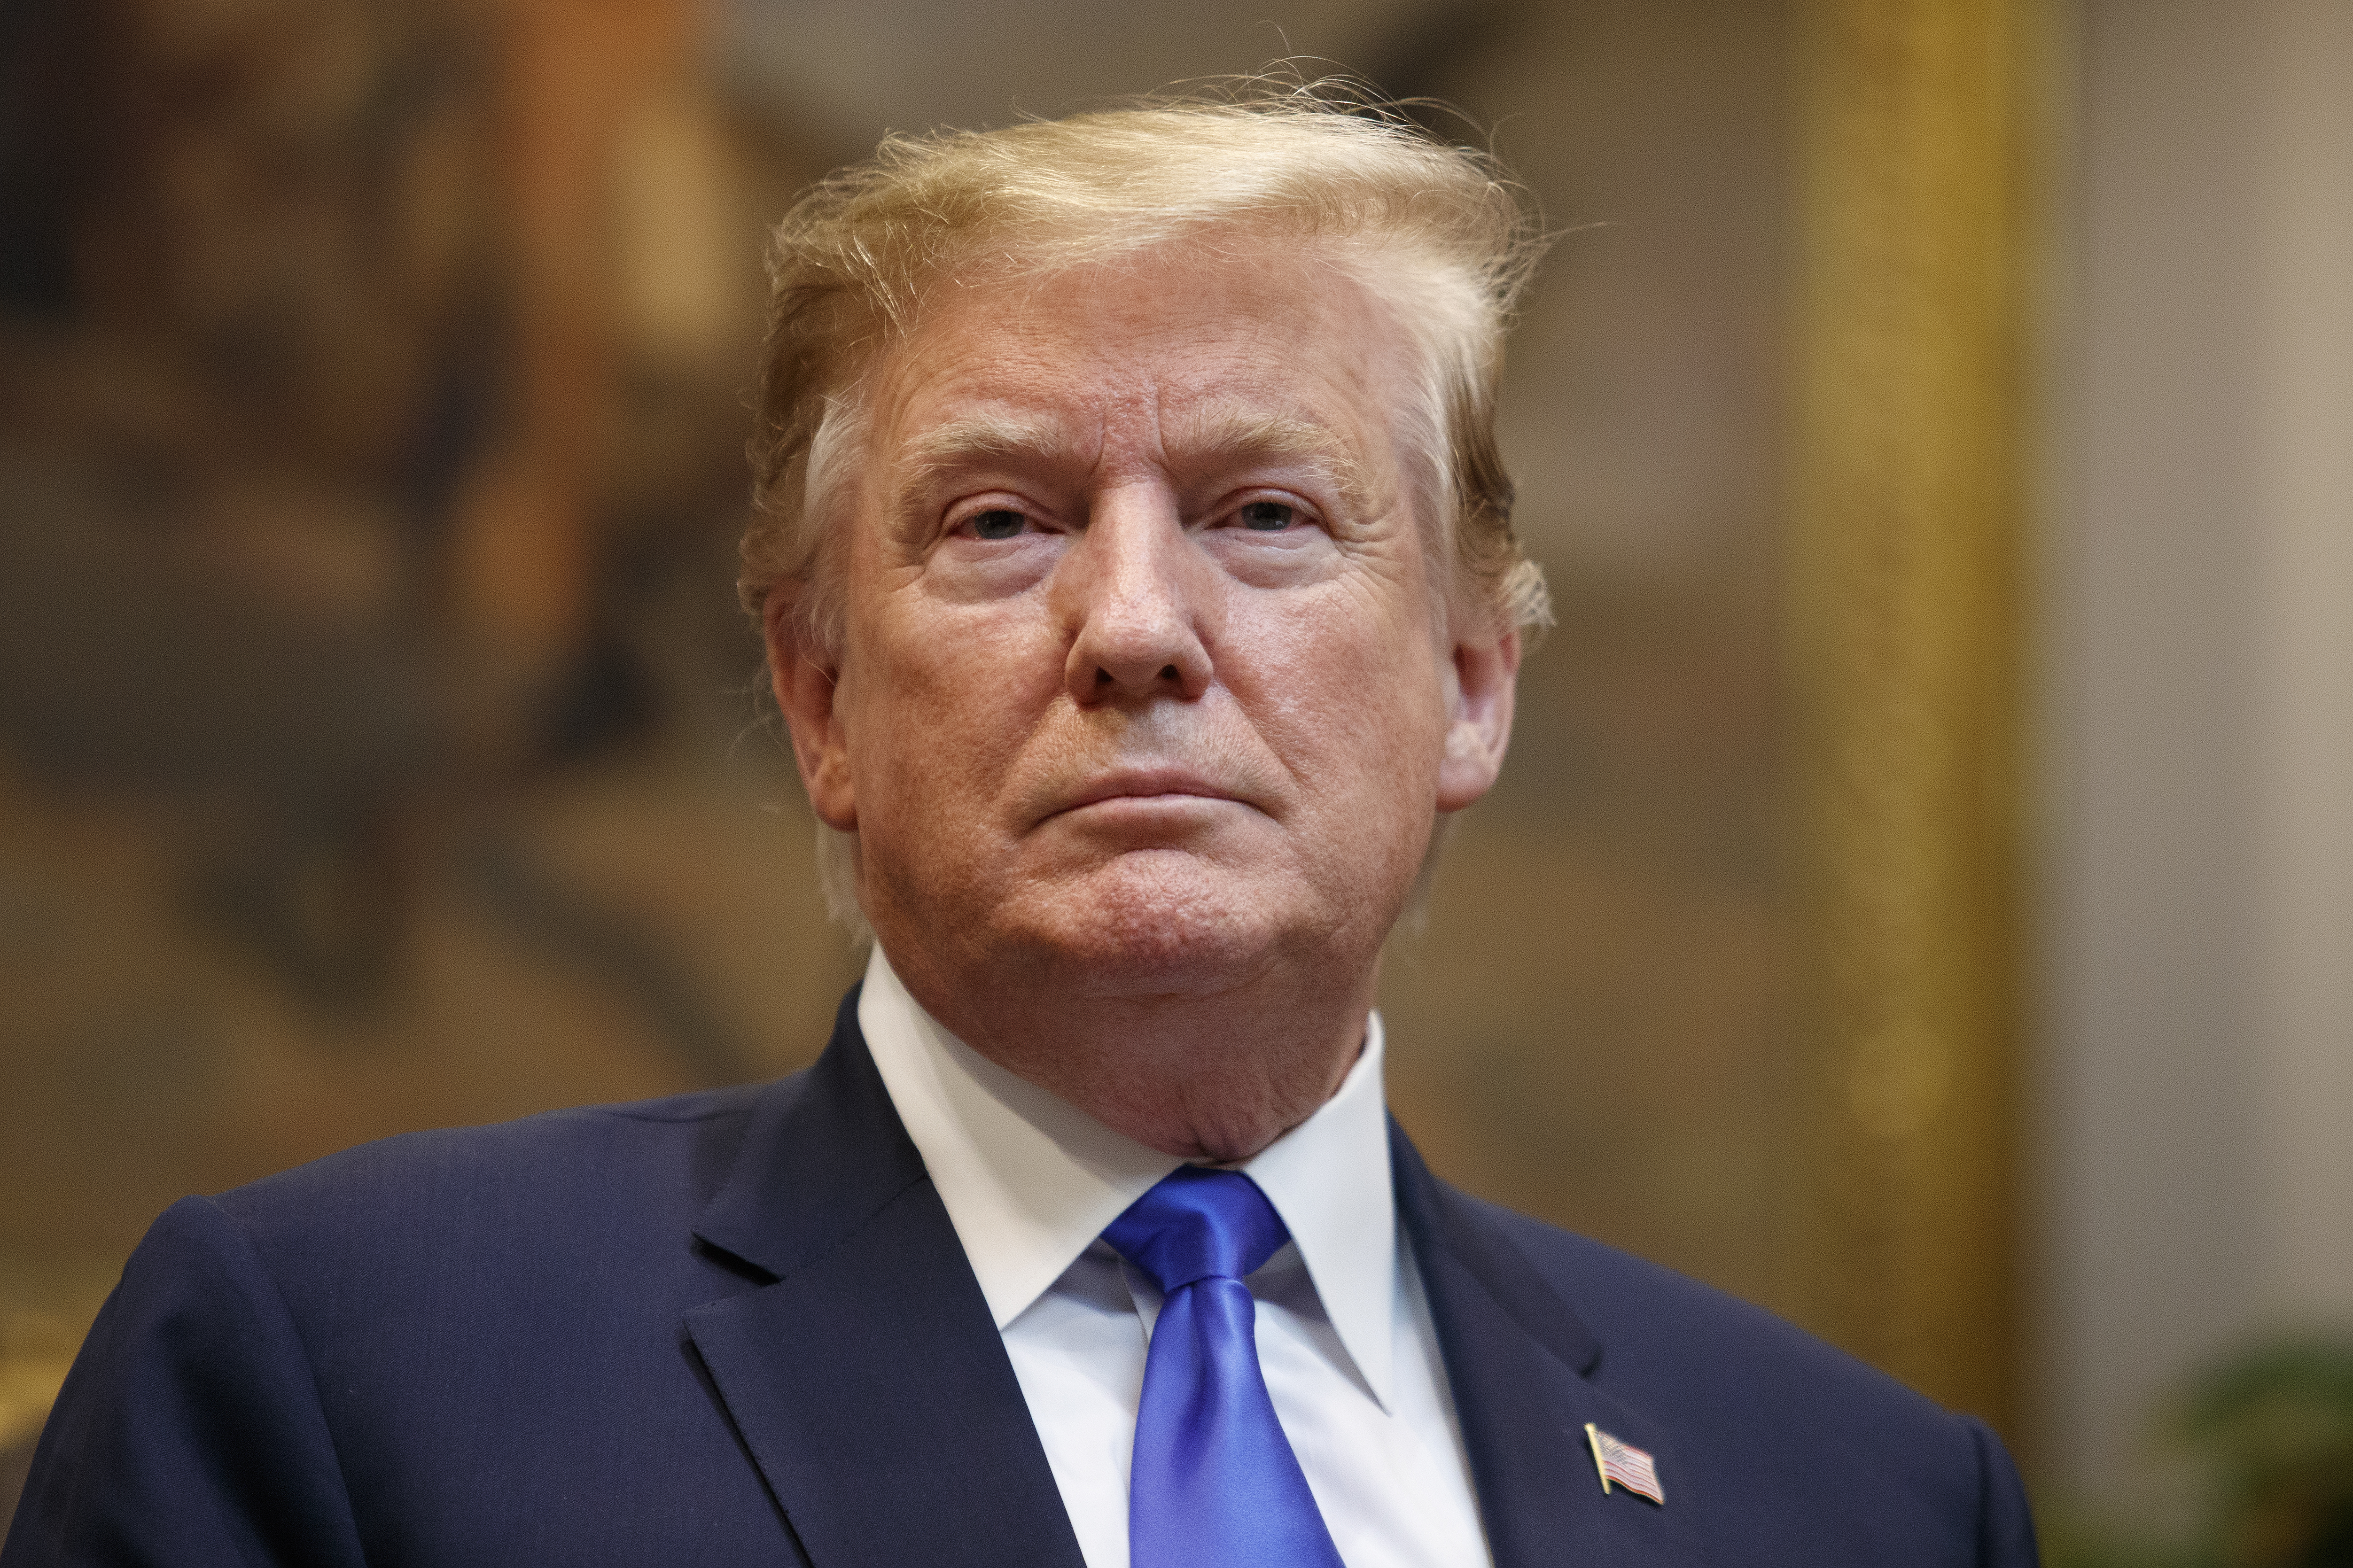 President Donald Trump delivers remarks on 5G deployment in the United States on April 12, 2019. (Tom Brenner/Getty Images)